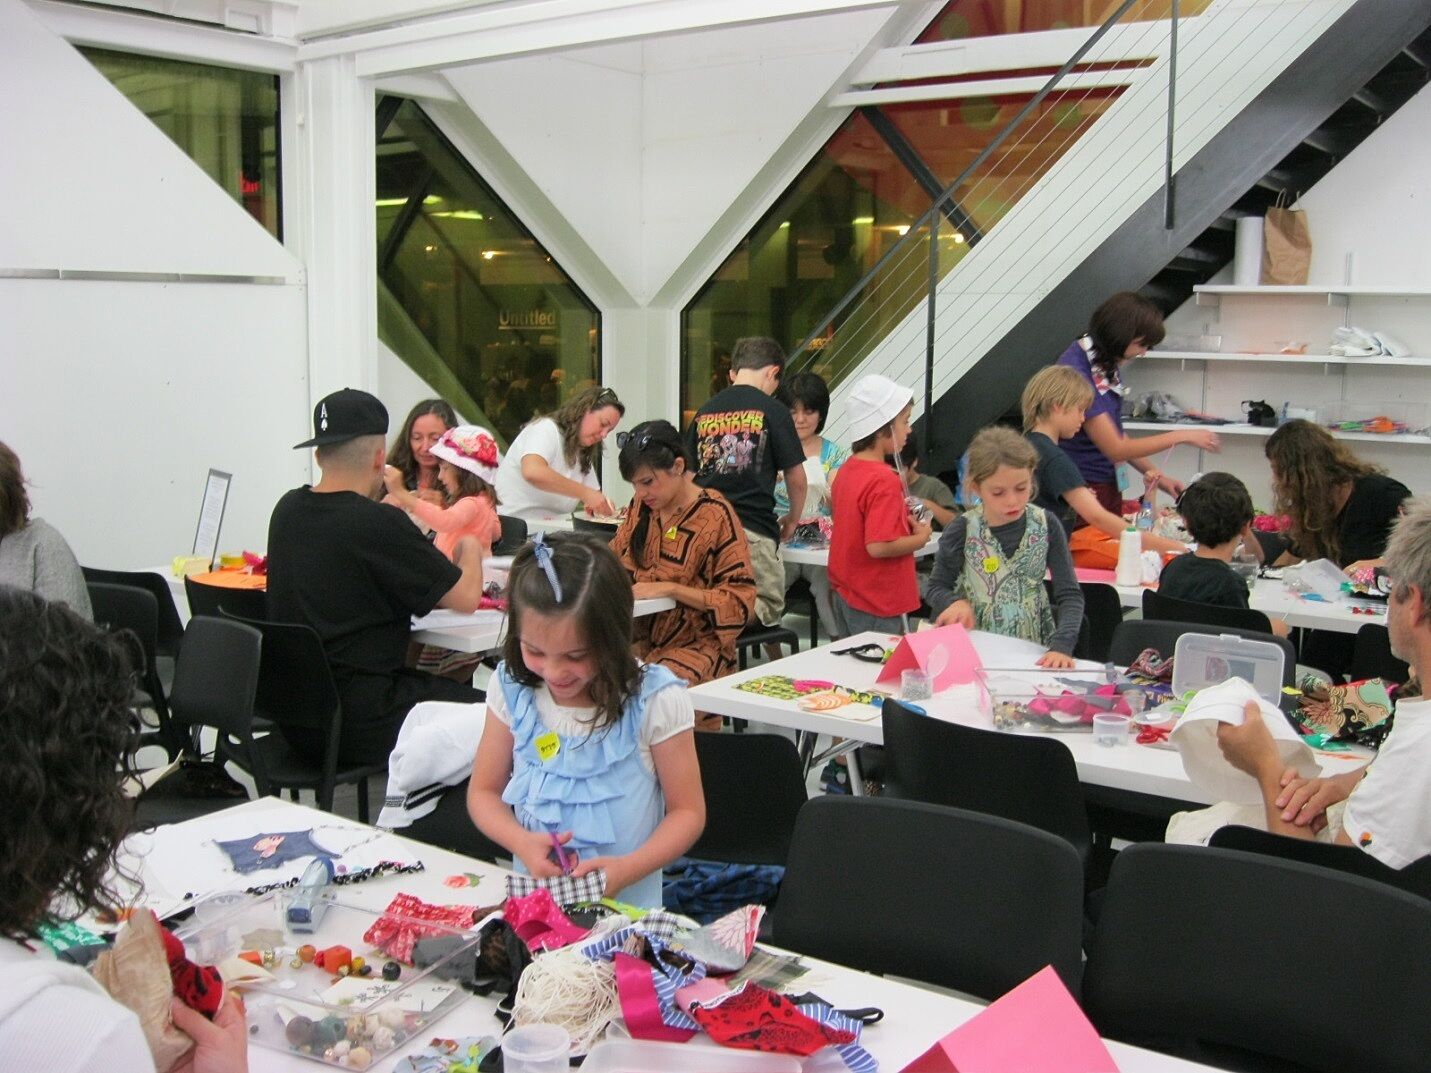 Adults and kids working on a crafts project